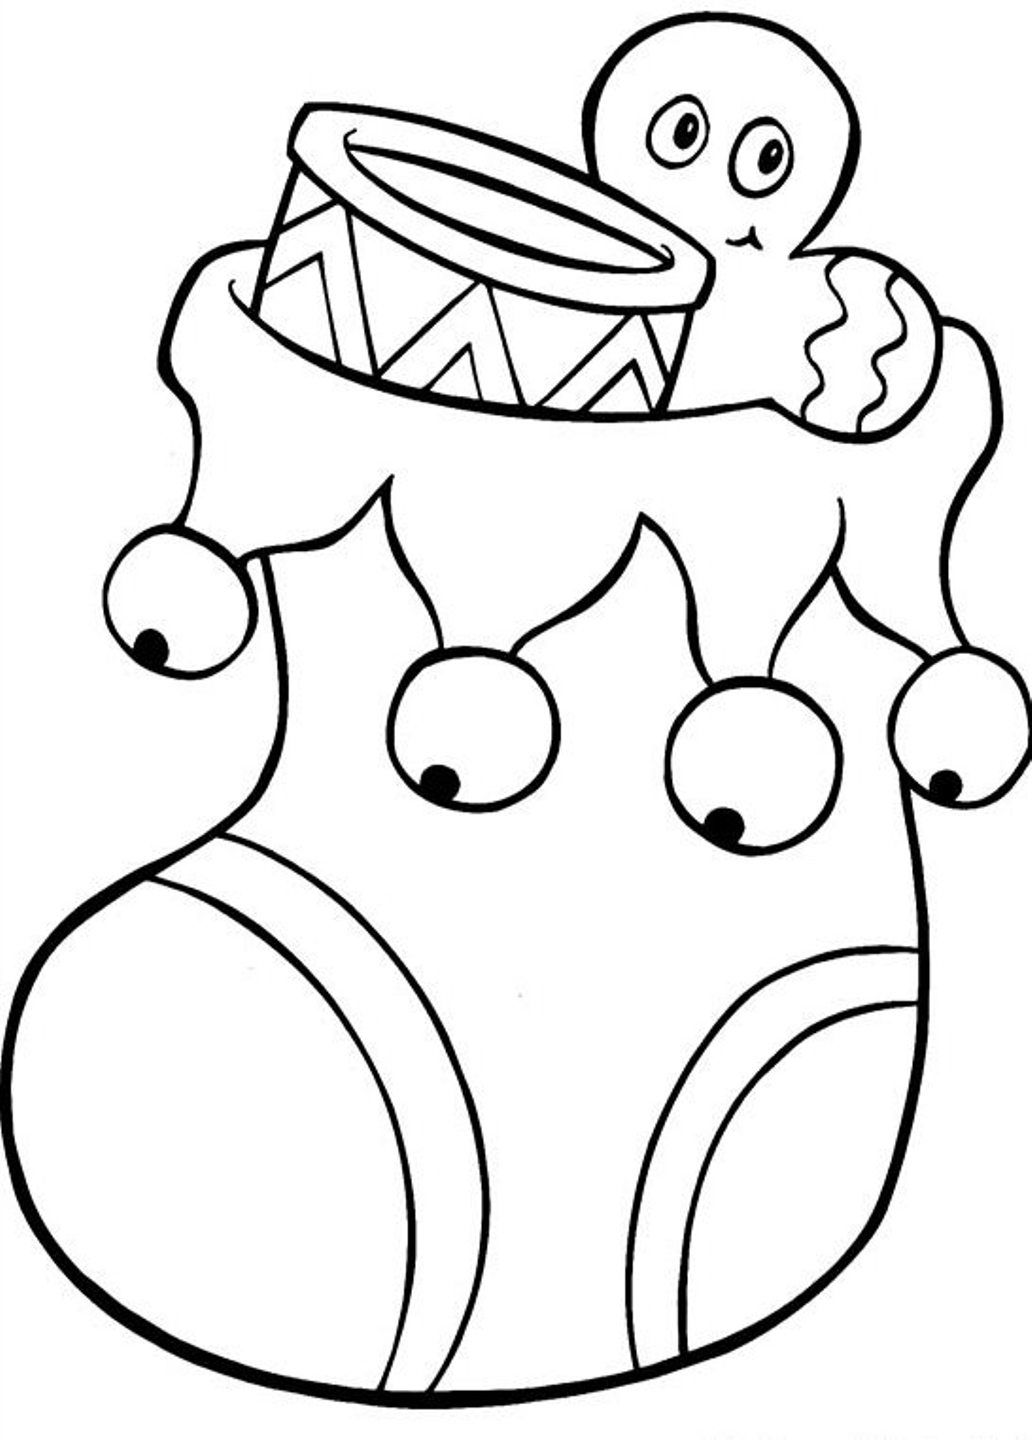 Kids Christmas Stocking Coloring Pages | Christmas Coloring pages ...